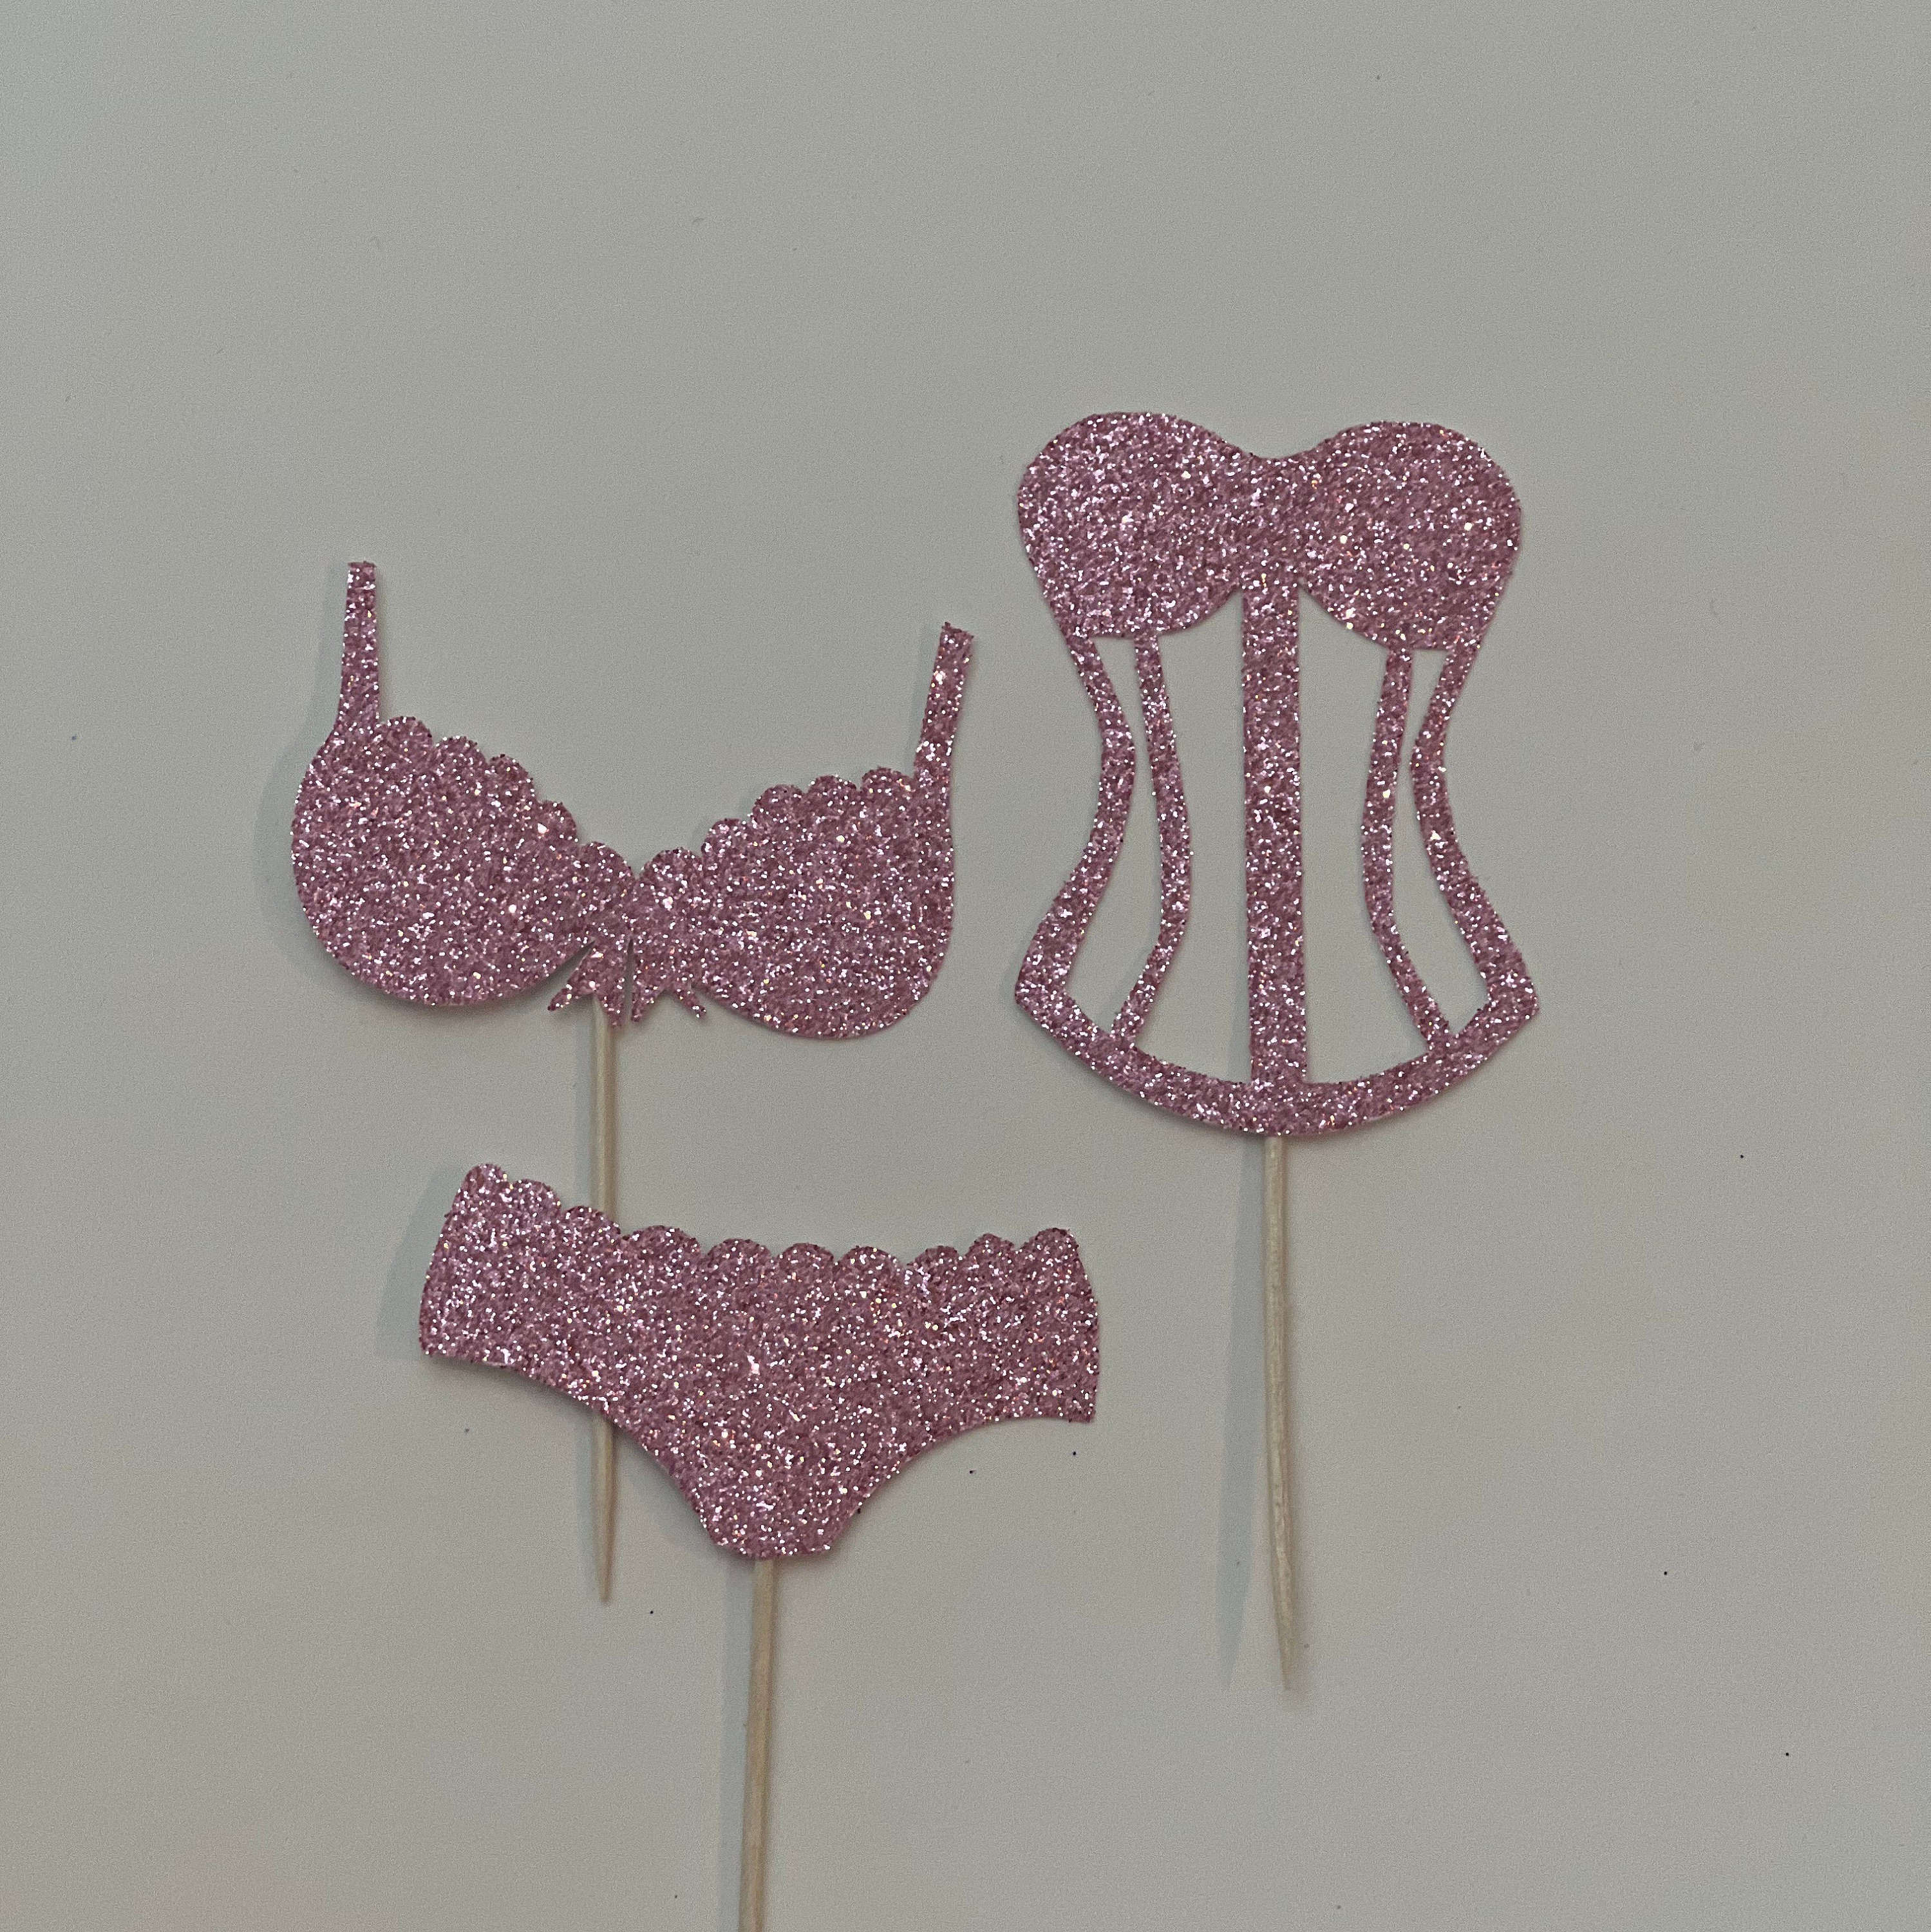 Lingerie cupcake toppers, bridal shower cupcake toppers, Bra cupcake  toppers, Underwear cupcake toppers, set of 12 toppers